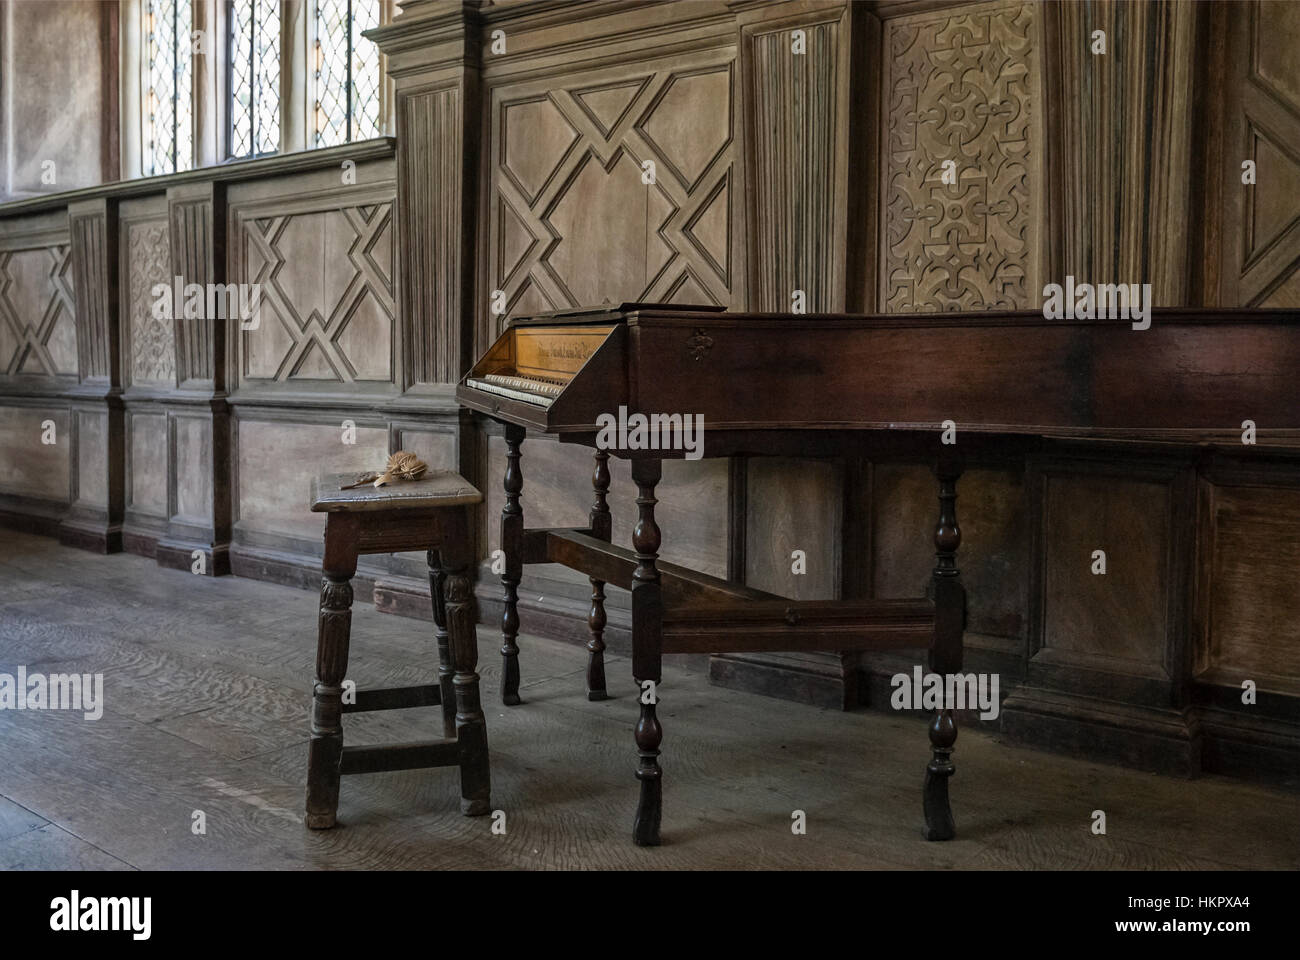 Antique cembalo inside Norman Castle Haddon Hall, Bakewell, Derbyshire, England Stock Photo